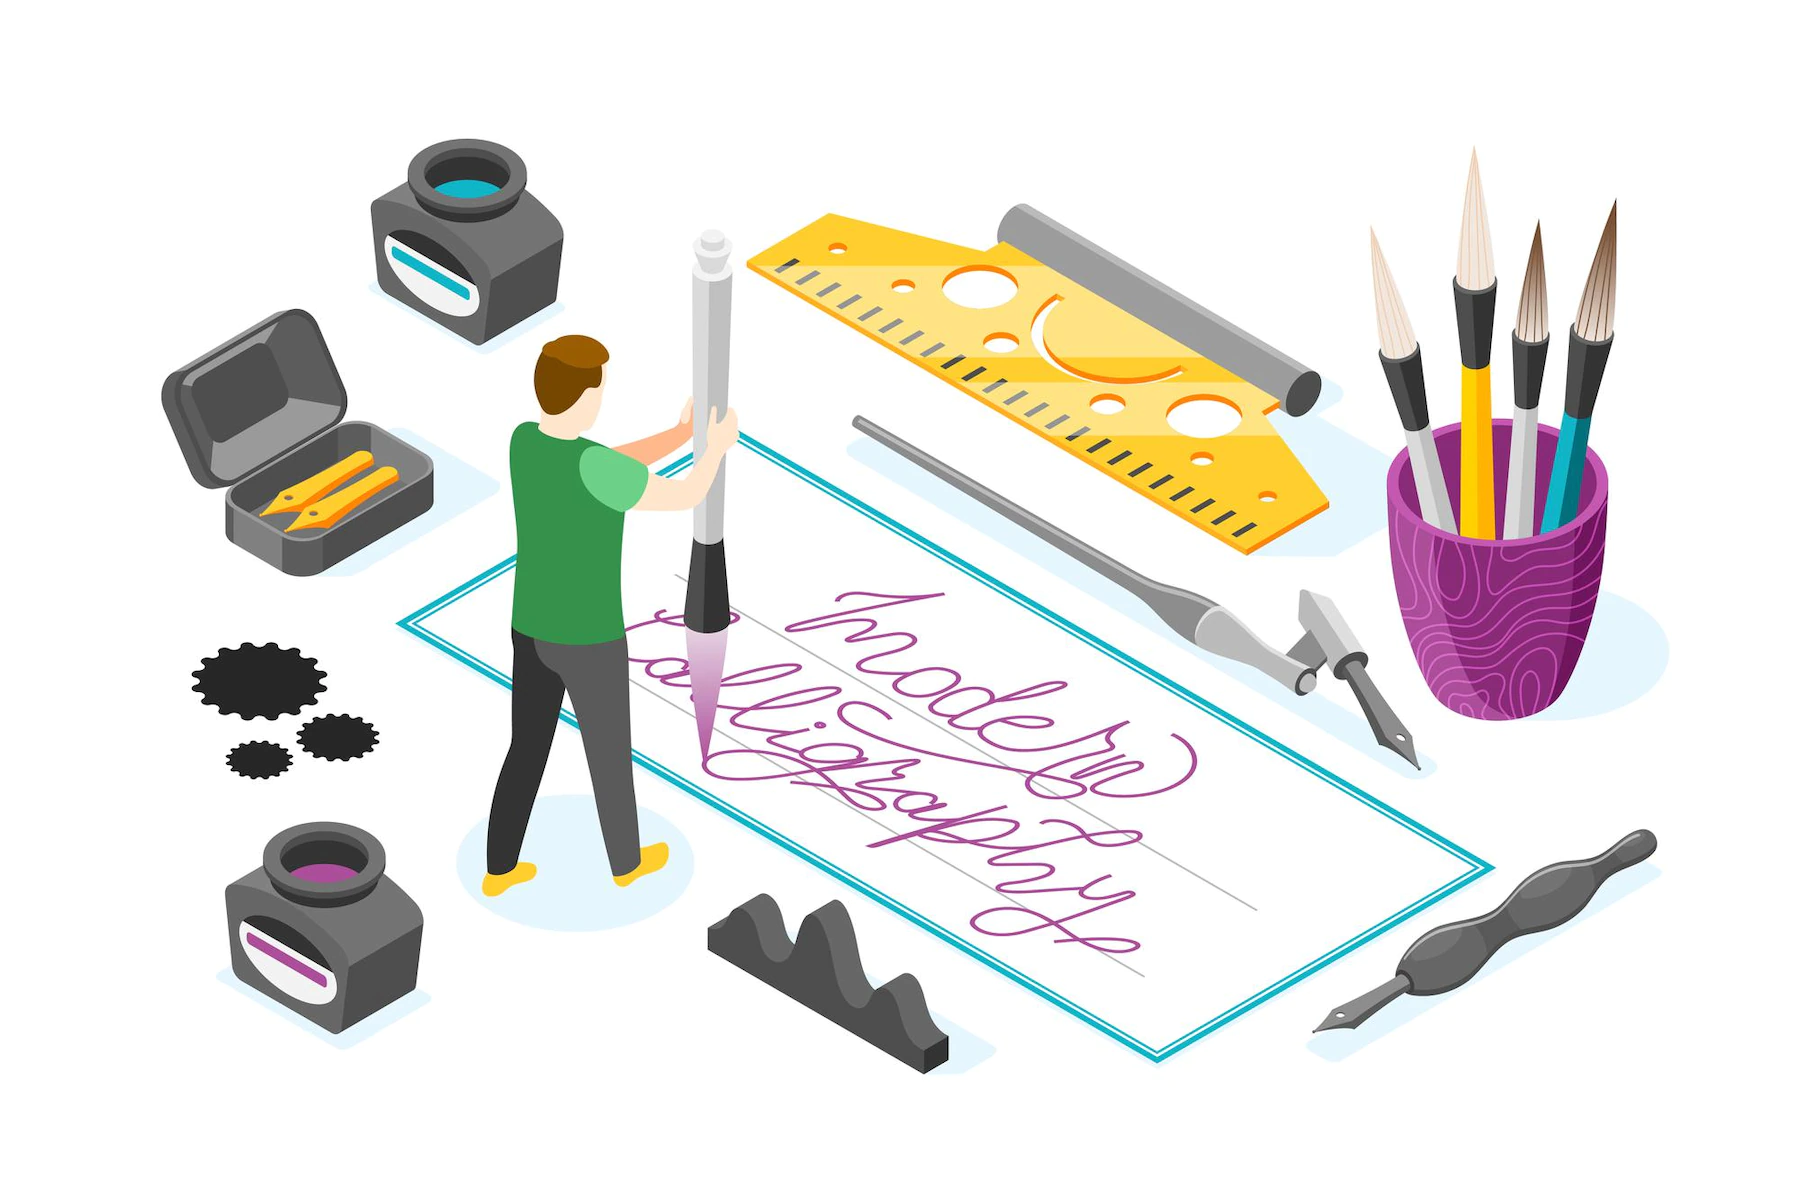 illustration with male character holding ink pen surrounded by images writing tools illustration 1284 64435